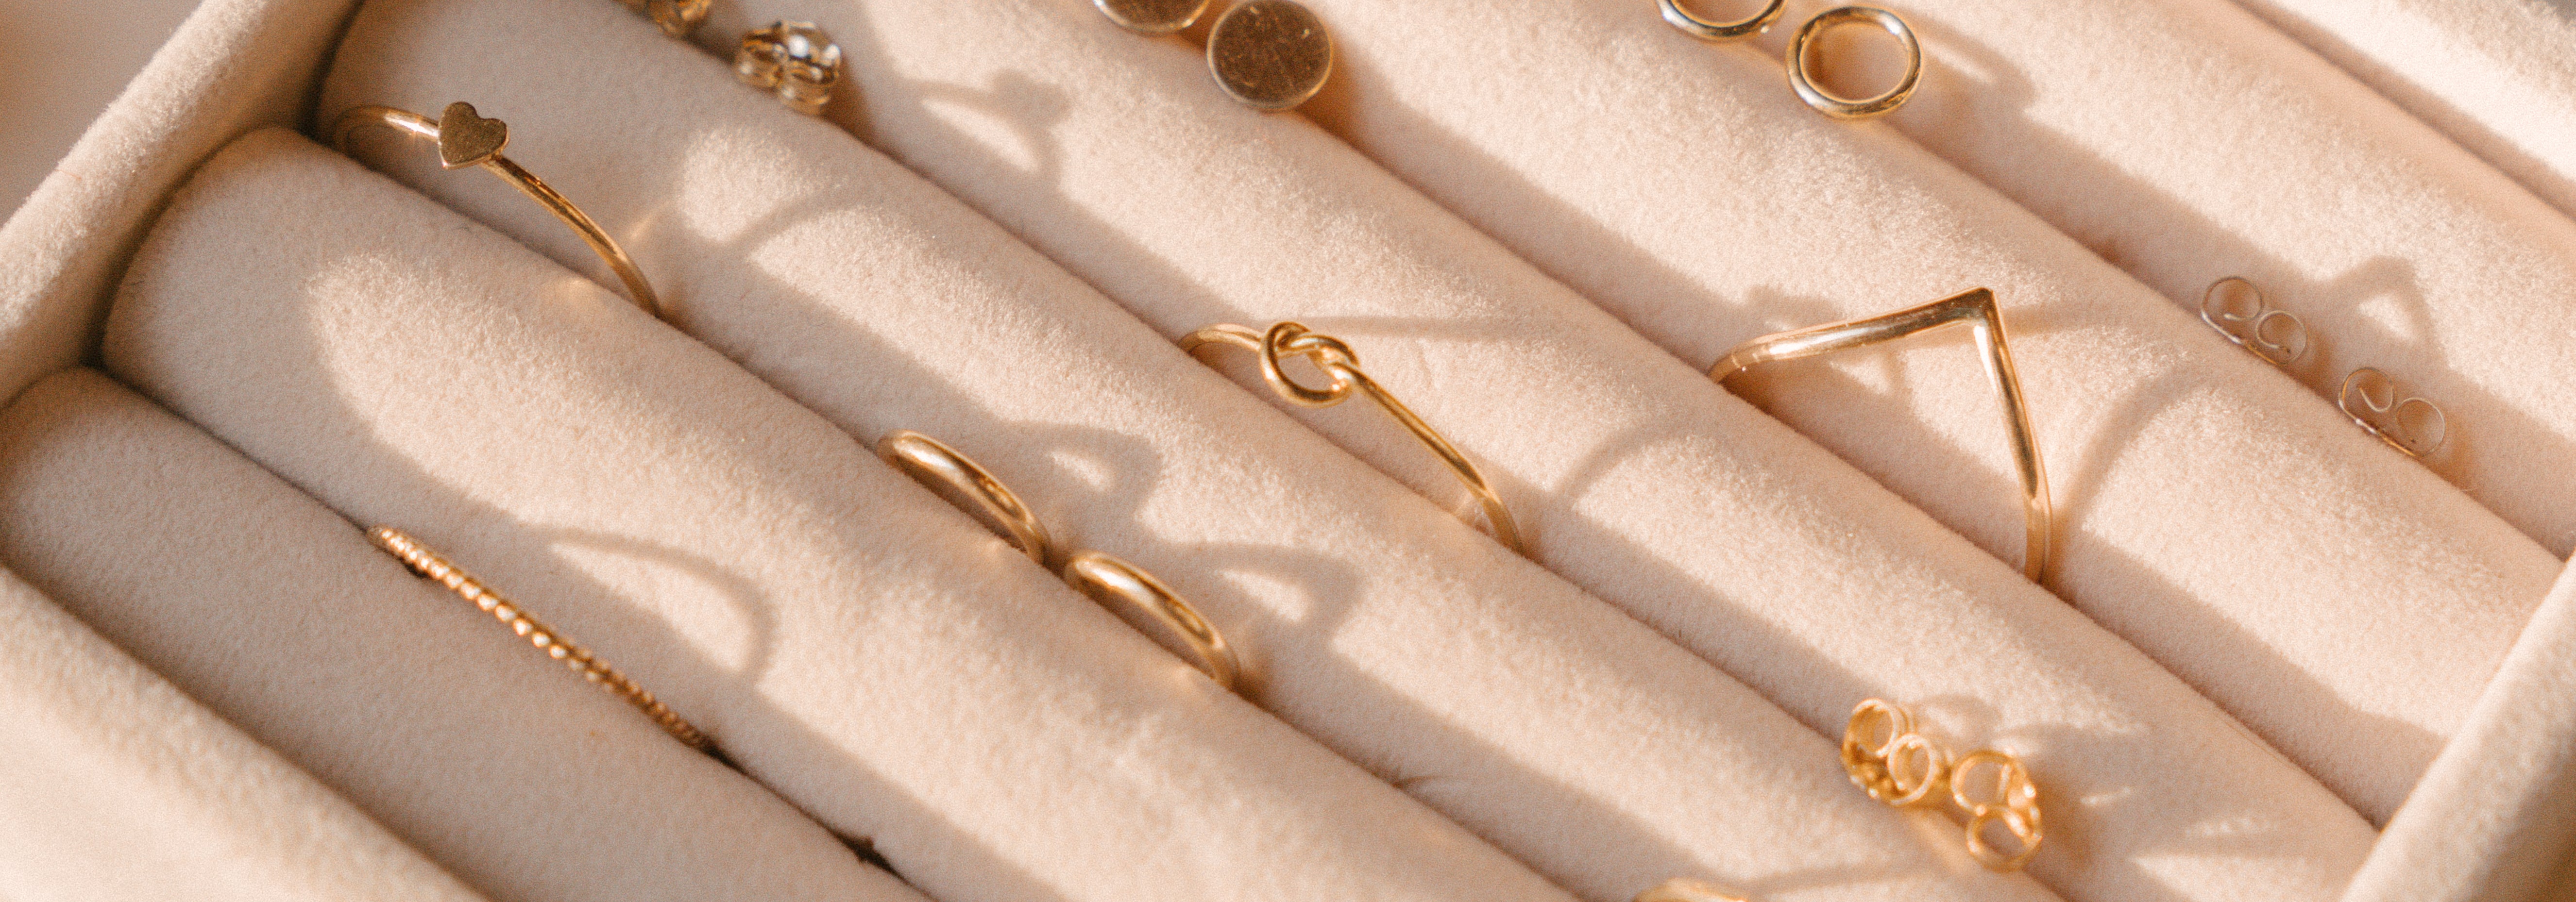 how-to-solder-gold-filled-jewelry